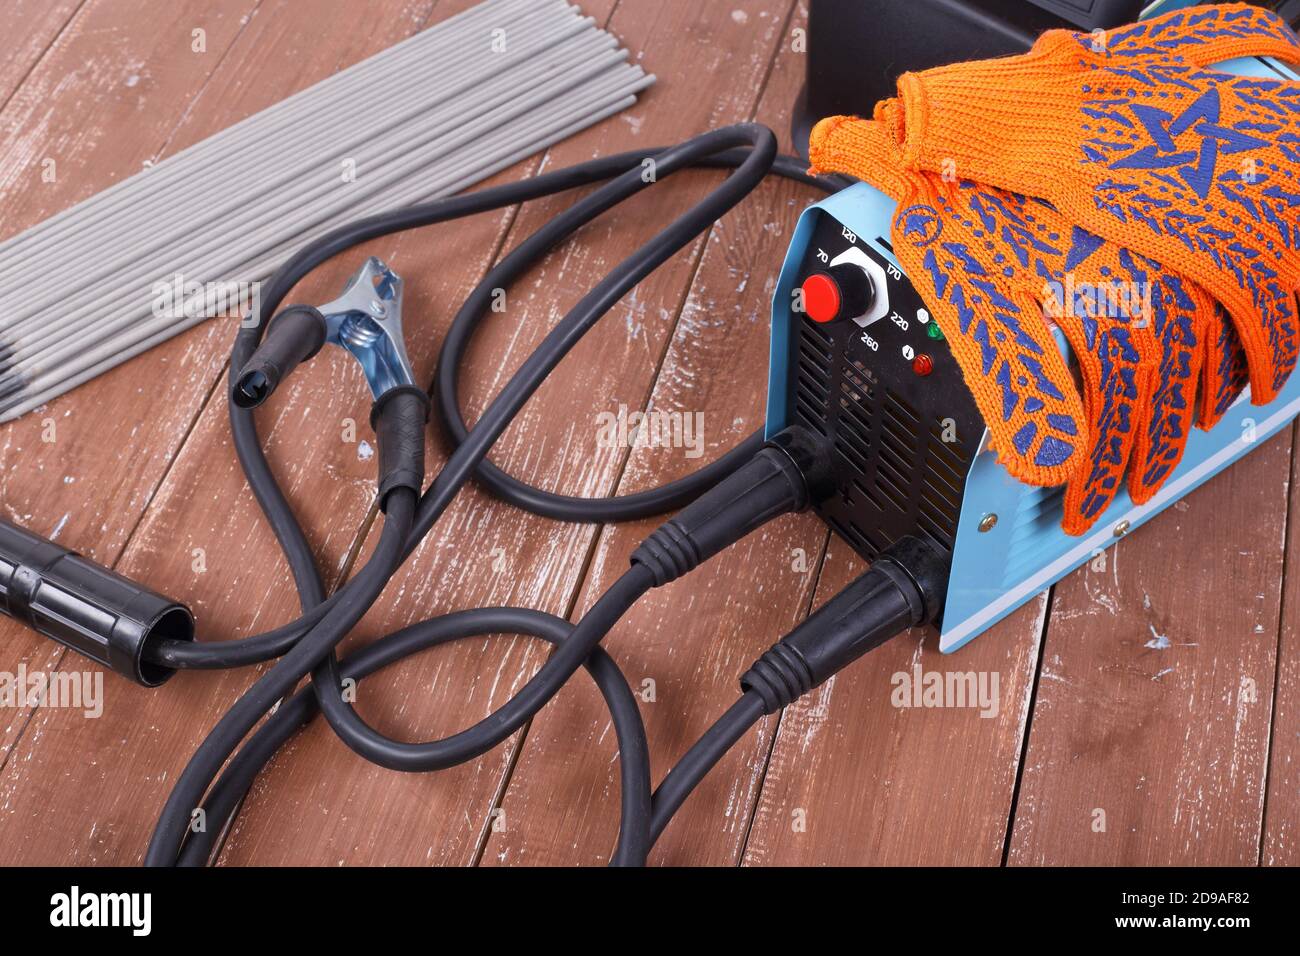 Industrial tool - Welding machine, electrode and working gloves on a wooden background Stock Photo